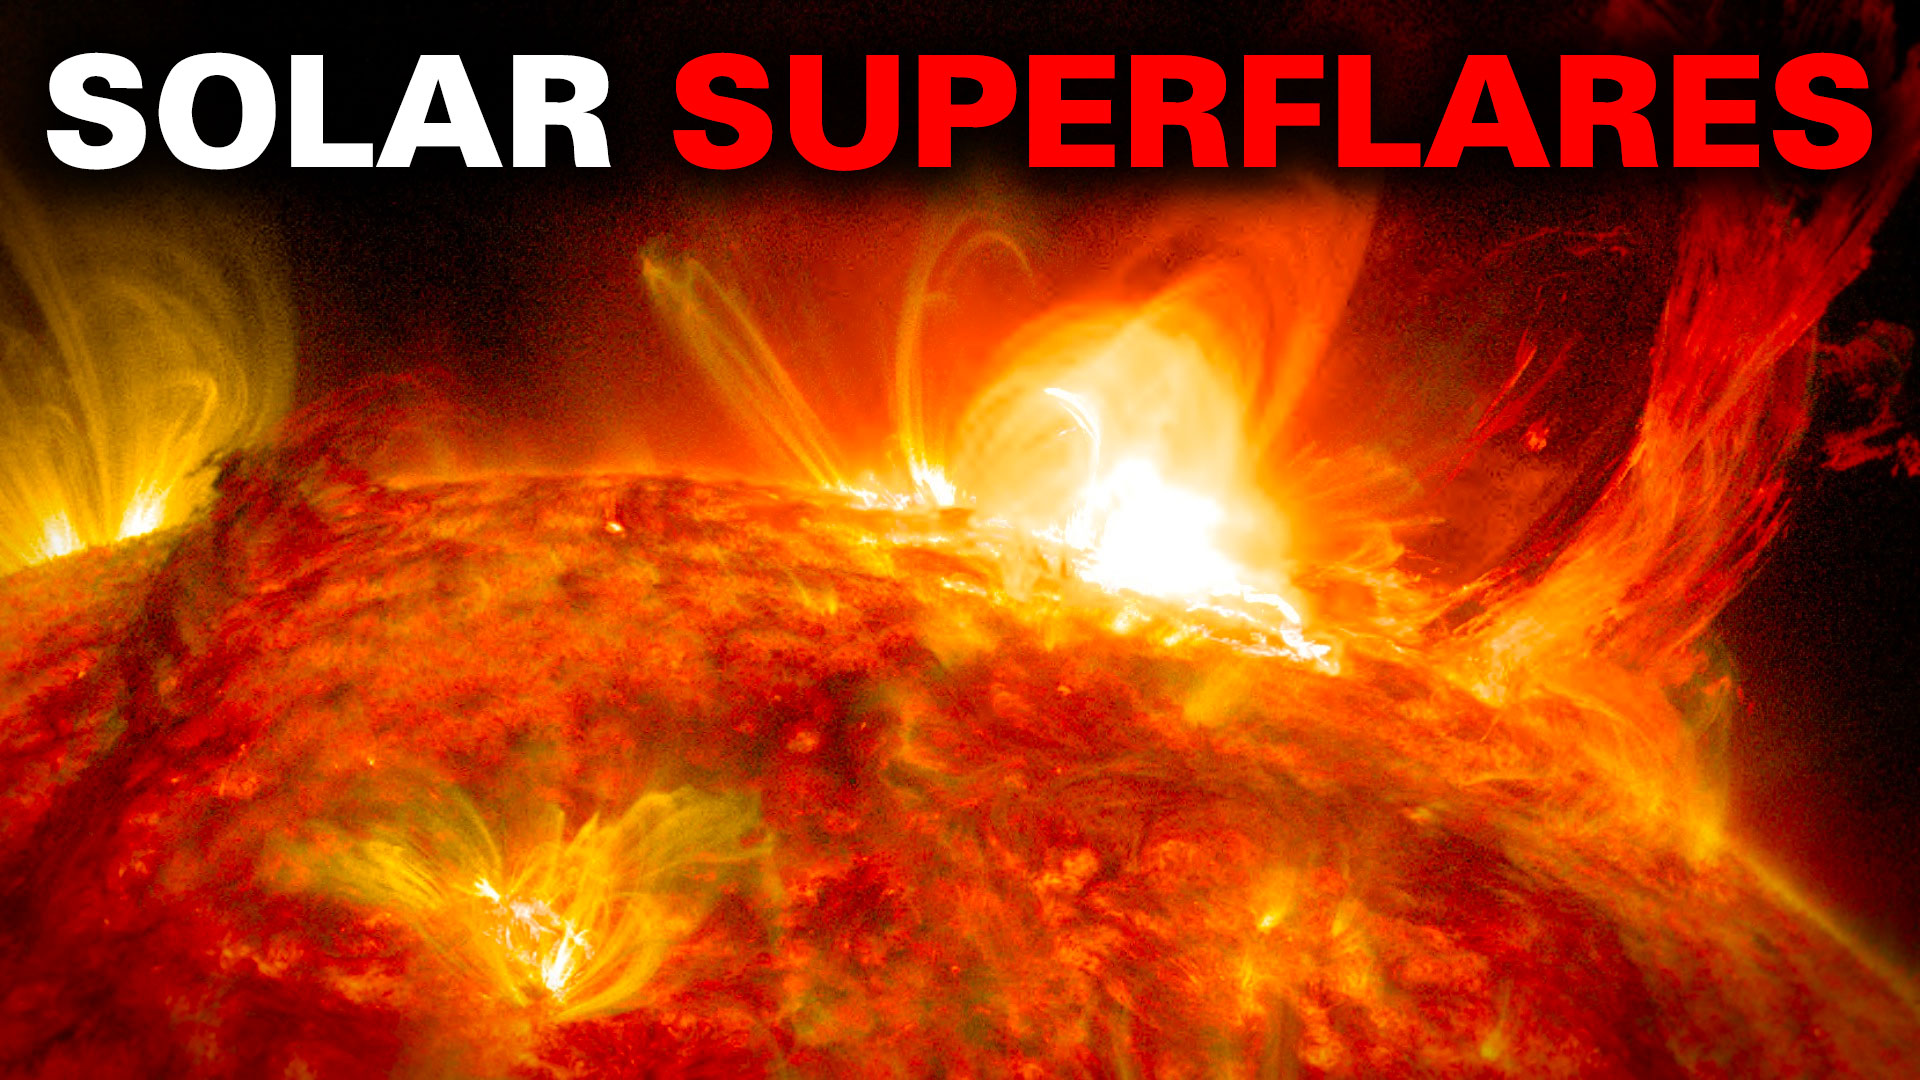 Physics behind unusual behavior of stars' super flares discovered